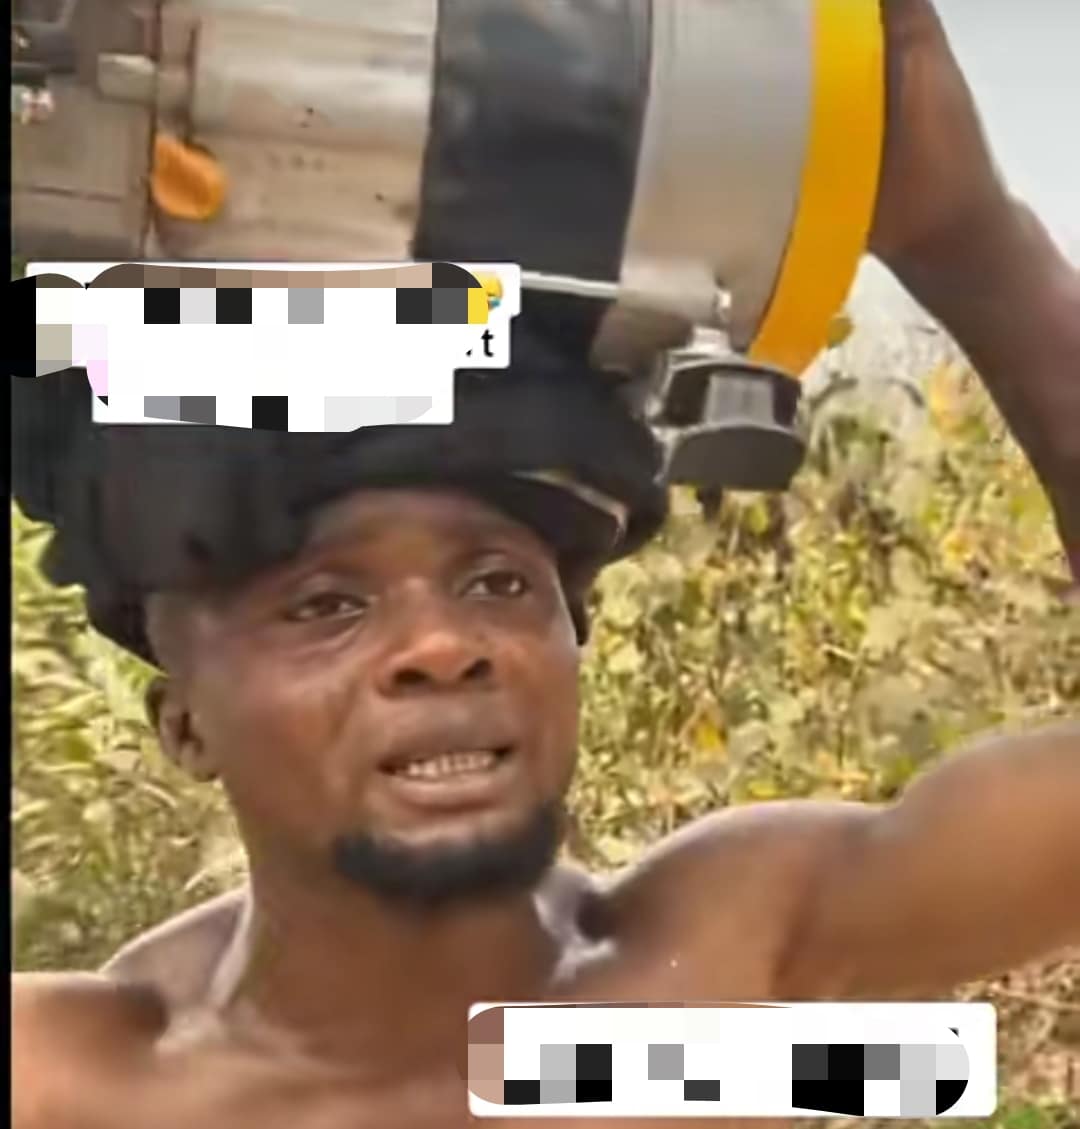 "Caught in the act" - Social media erupts as video shows public humiliation of generator thief